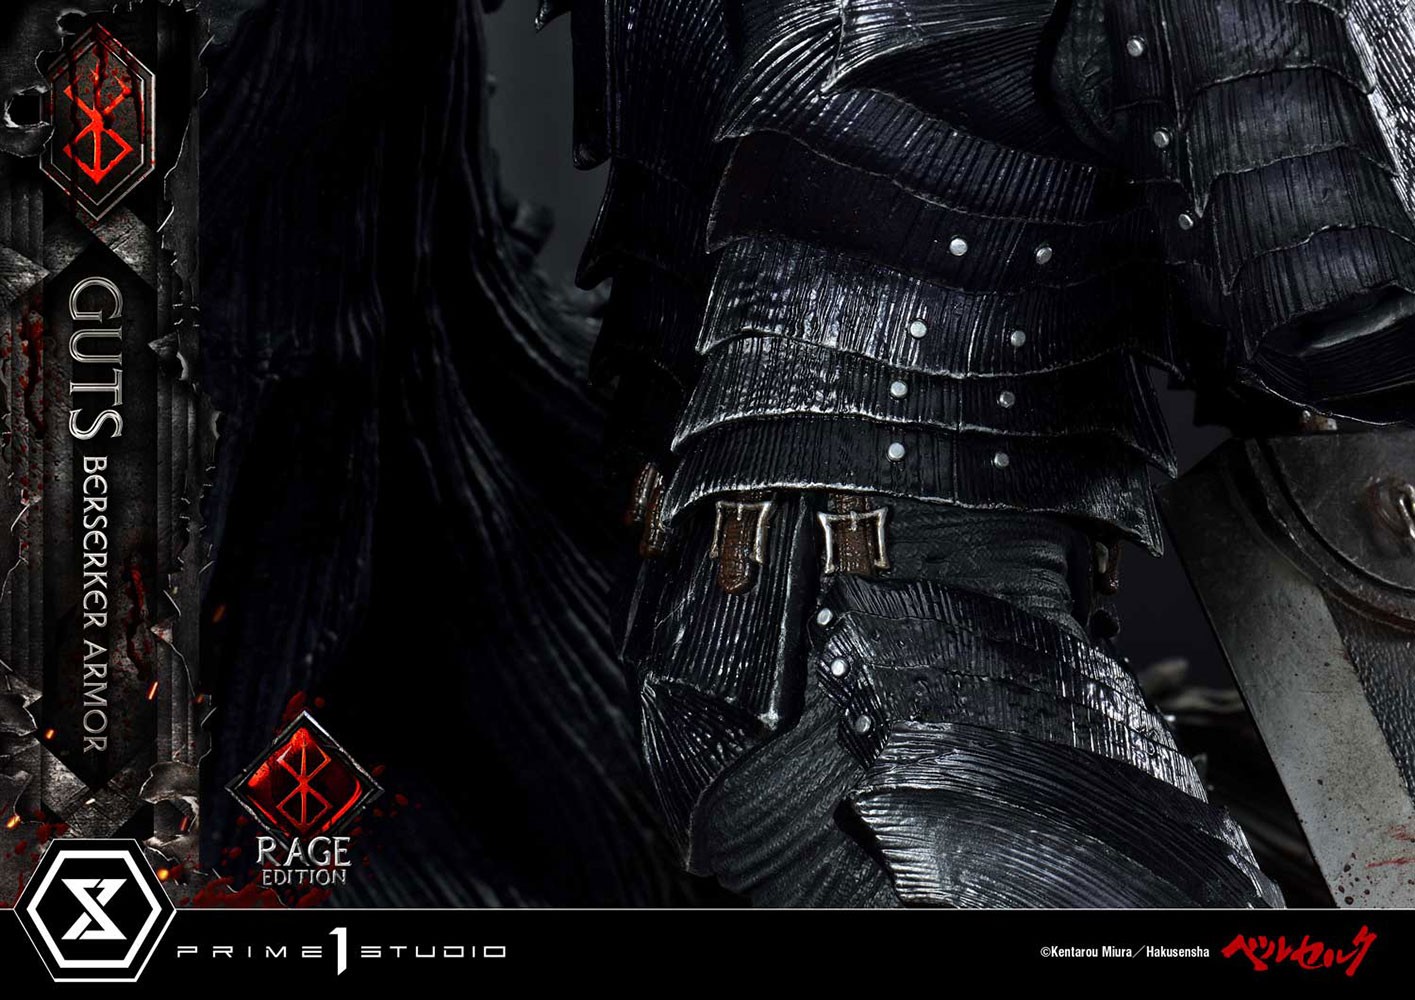 Guts Berserker Armor (Rage Edition) Collector Edition (Prototype Shown) View 5